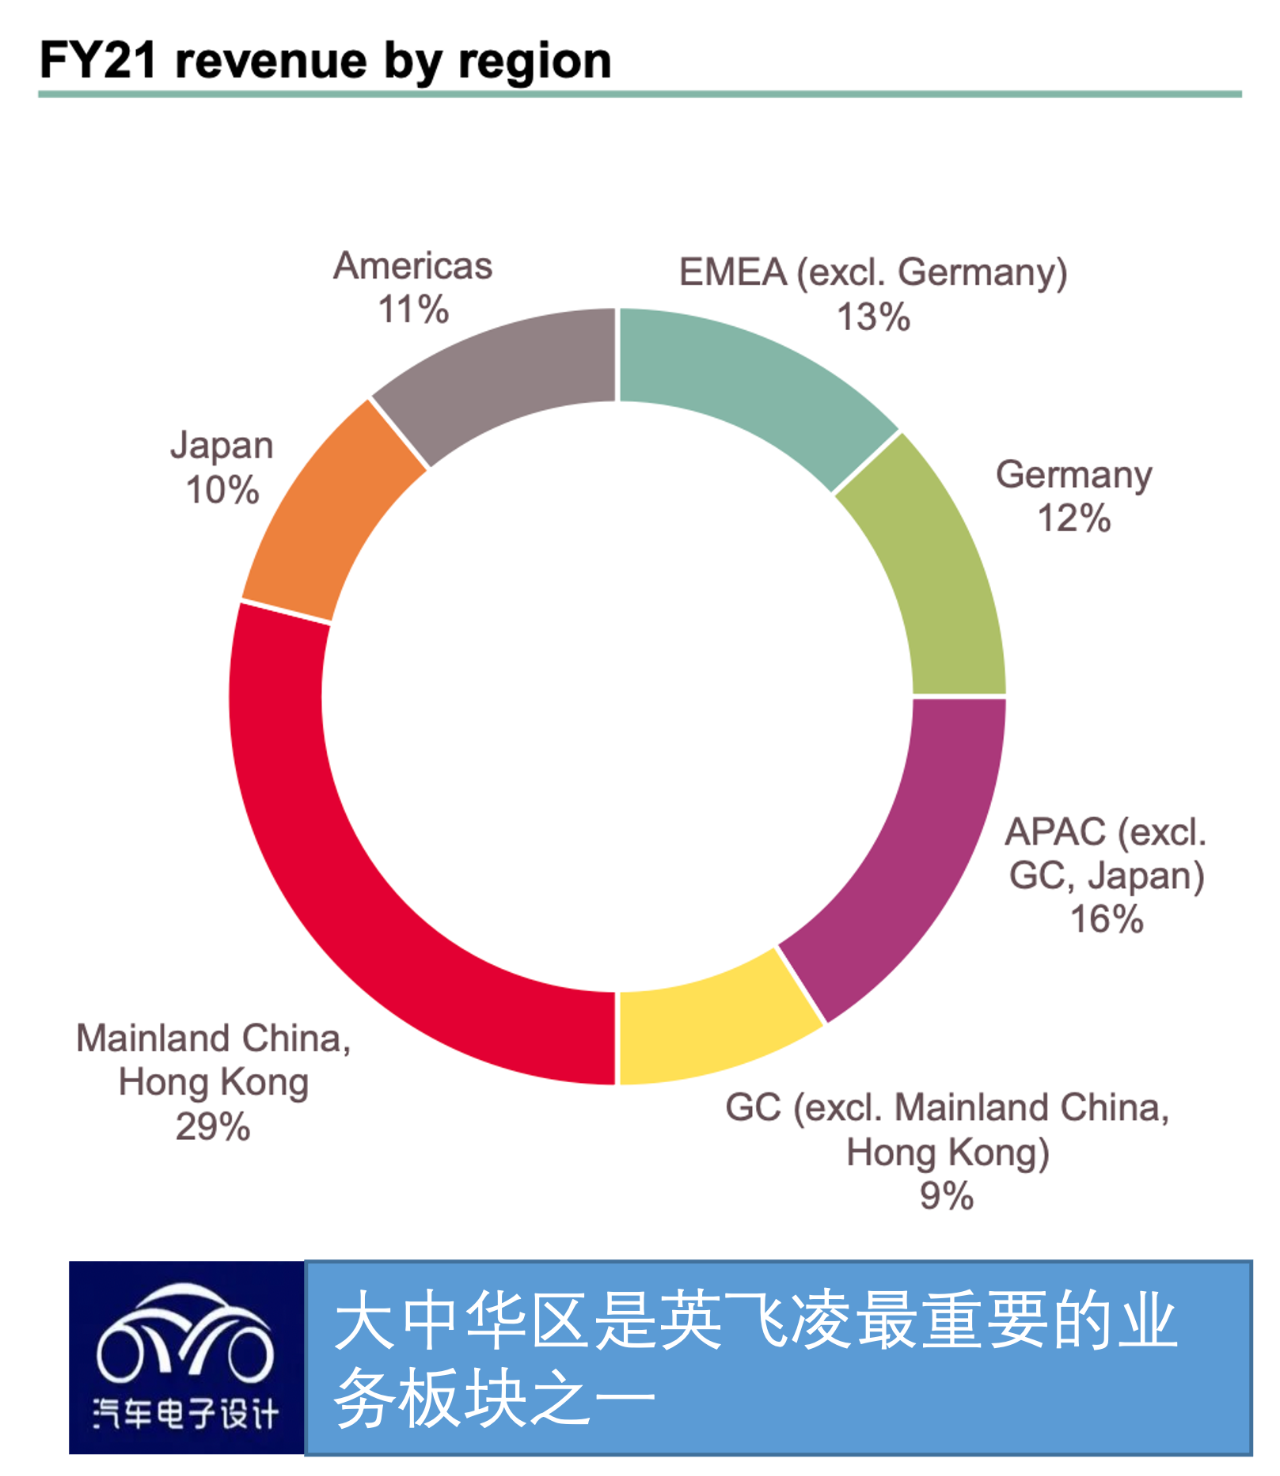 ▲ Figure 13. Greater China is Infineon's business focus